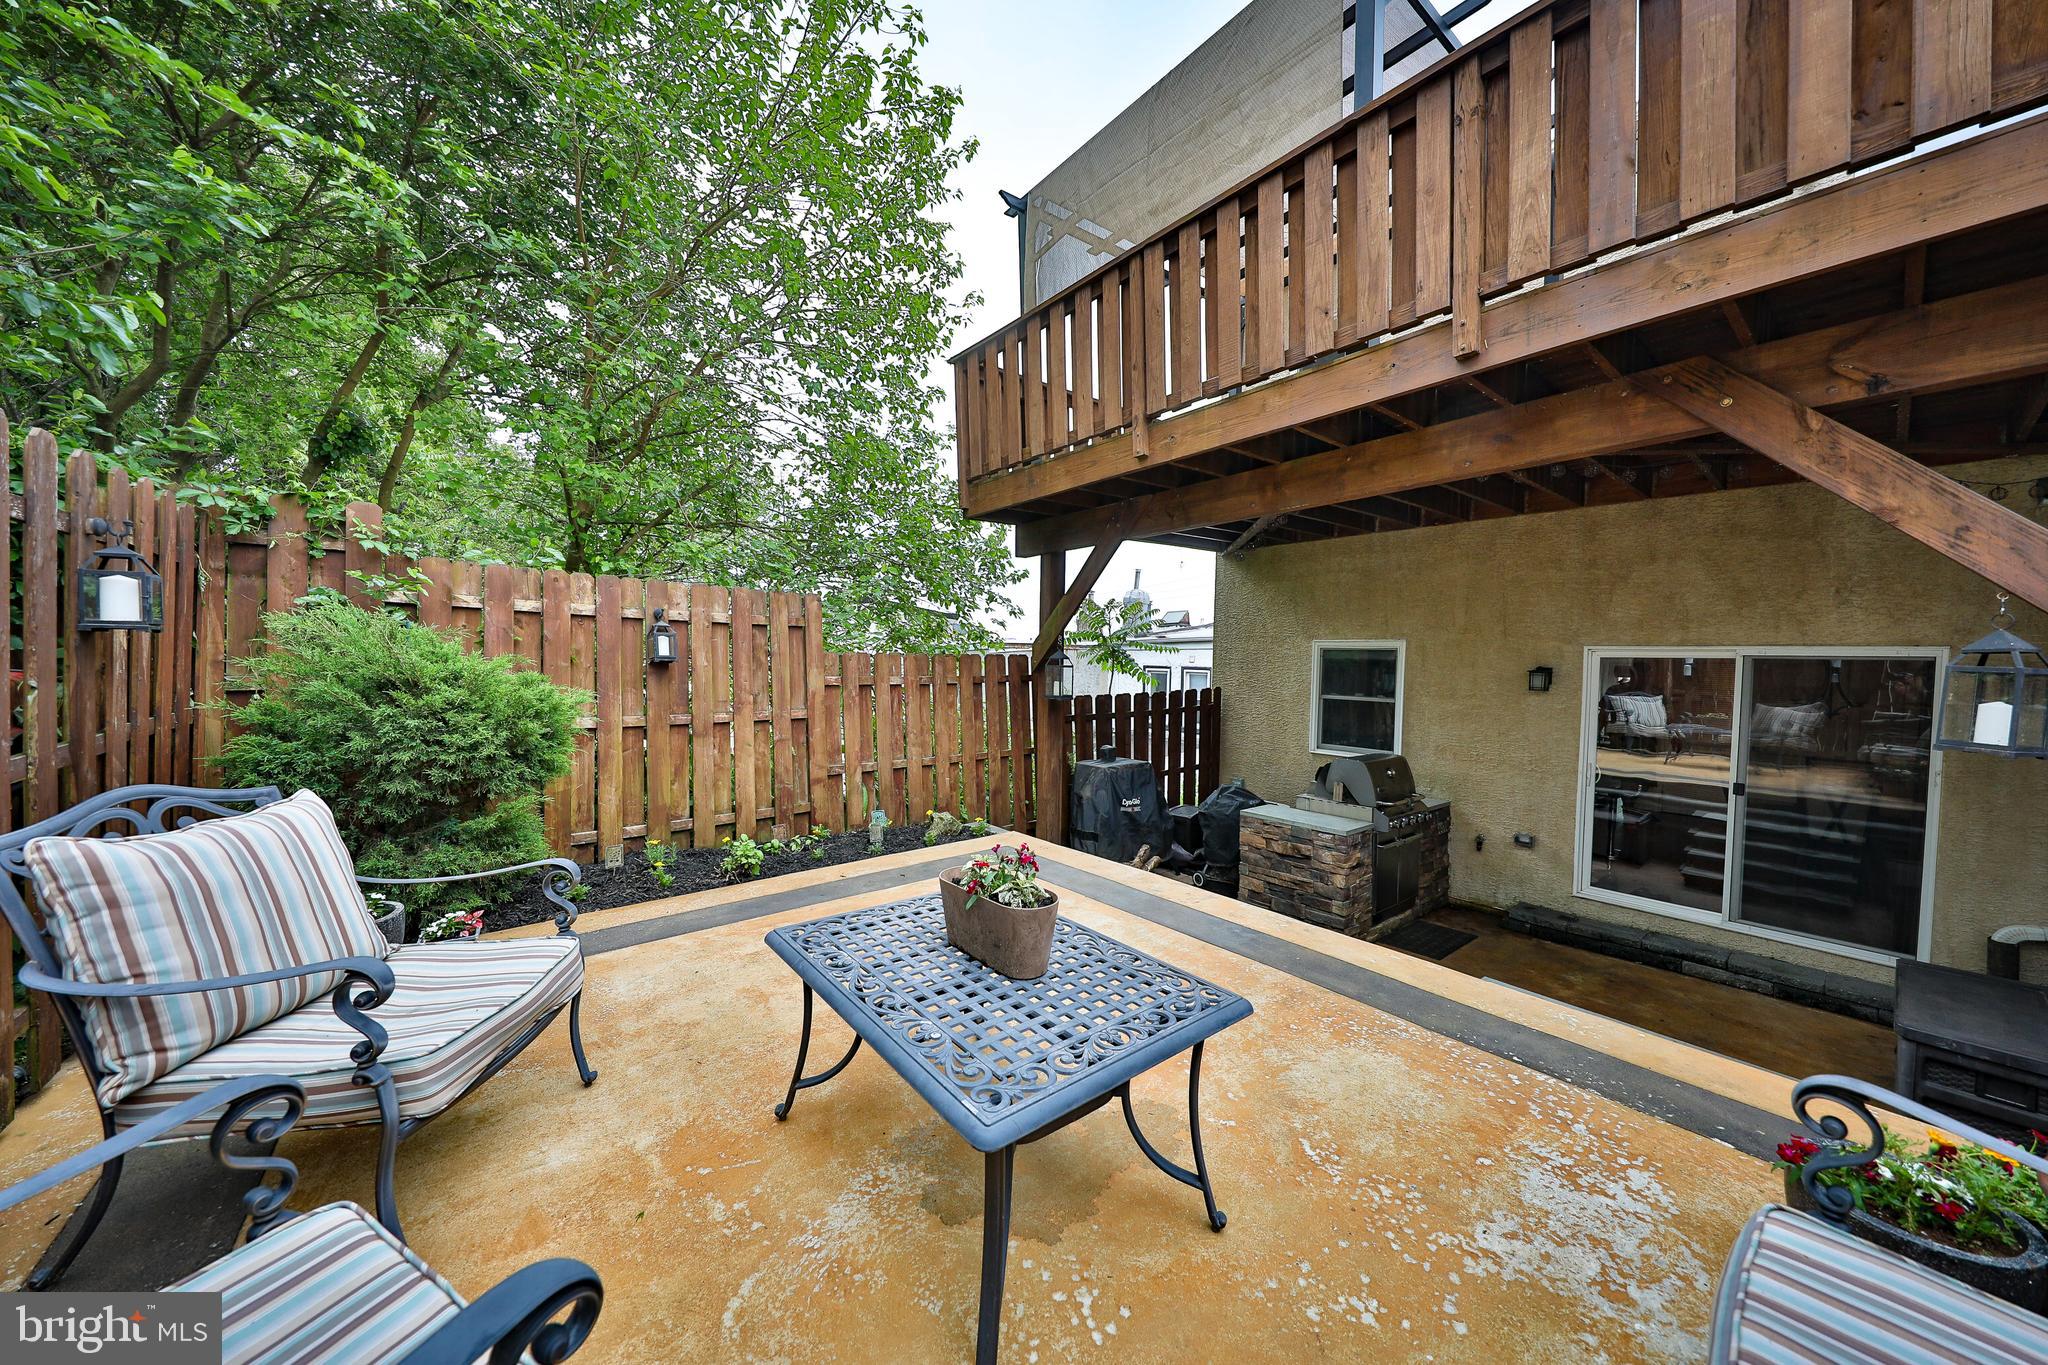 a backyard of a house with barbeque oven and outdoor seating